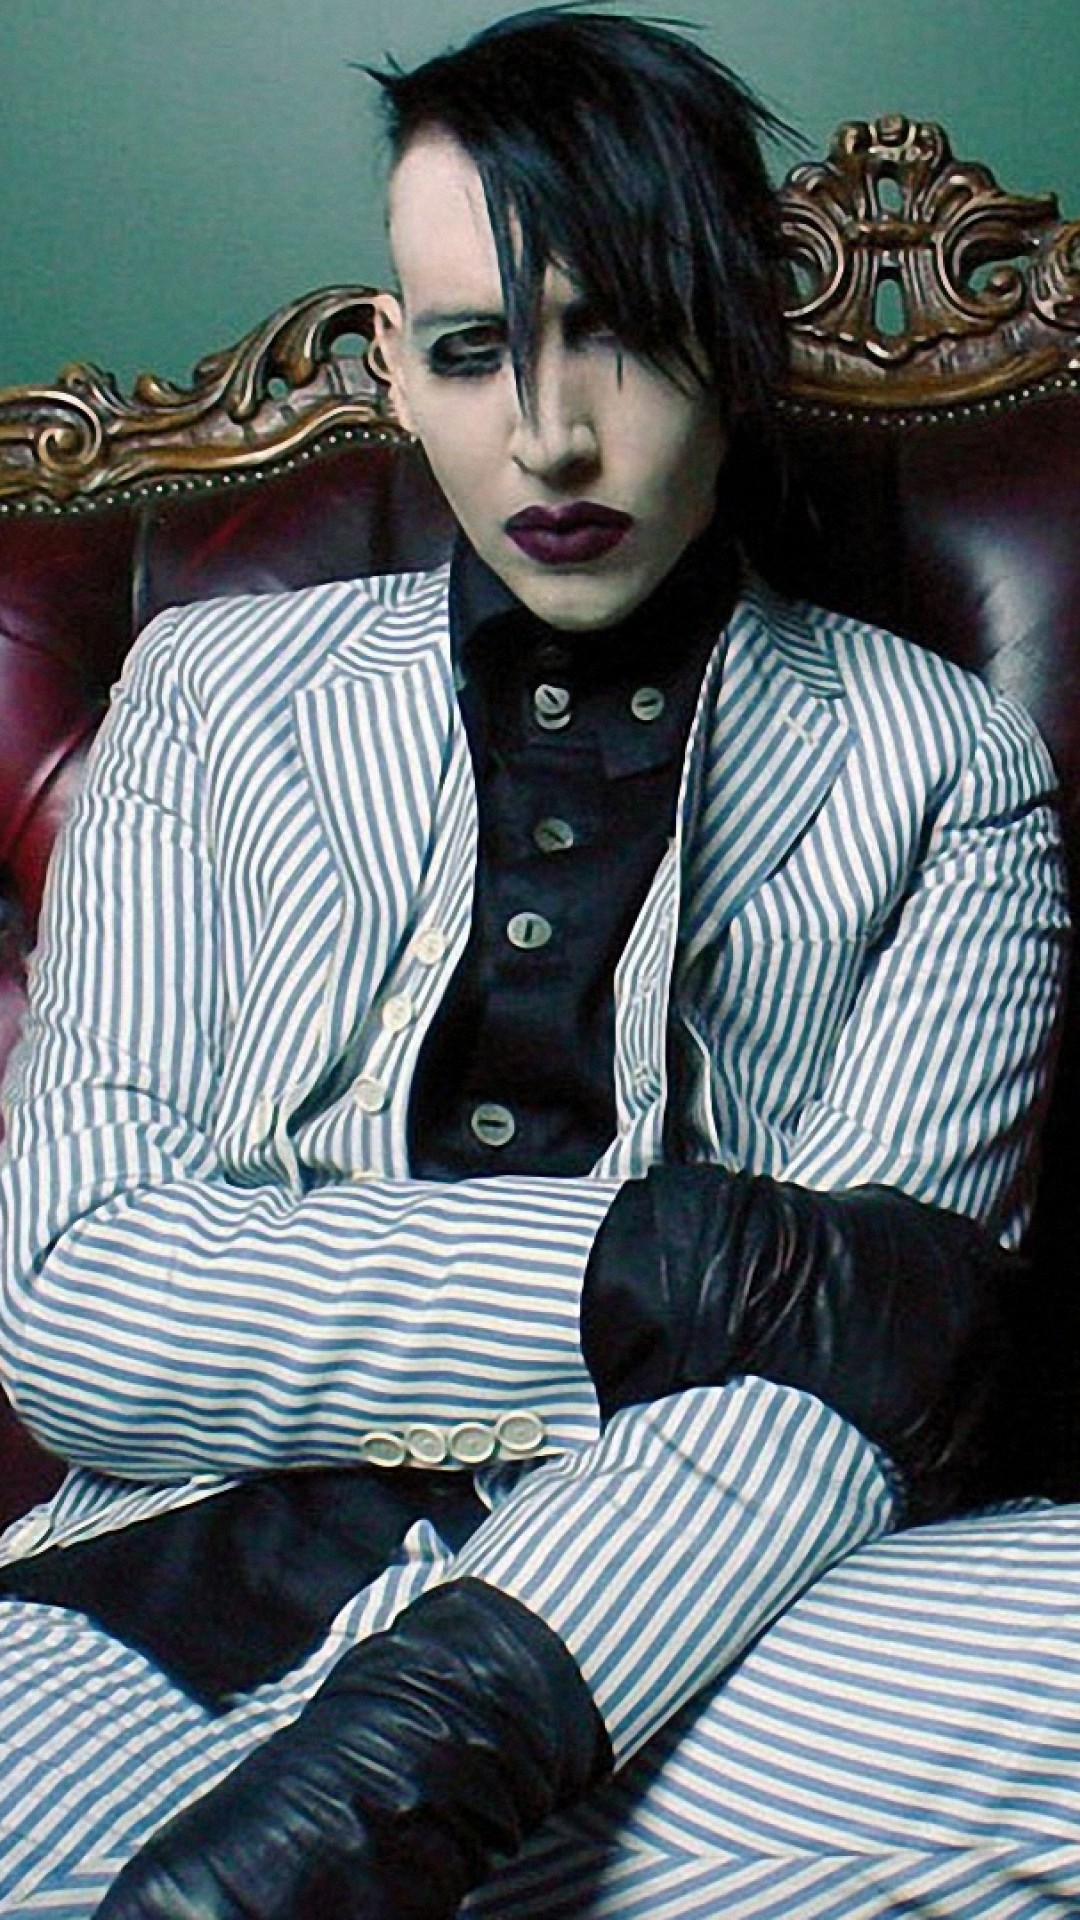 1080x1920 Marilyn Manson Wallpaper For Android